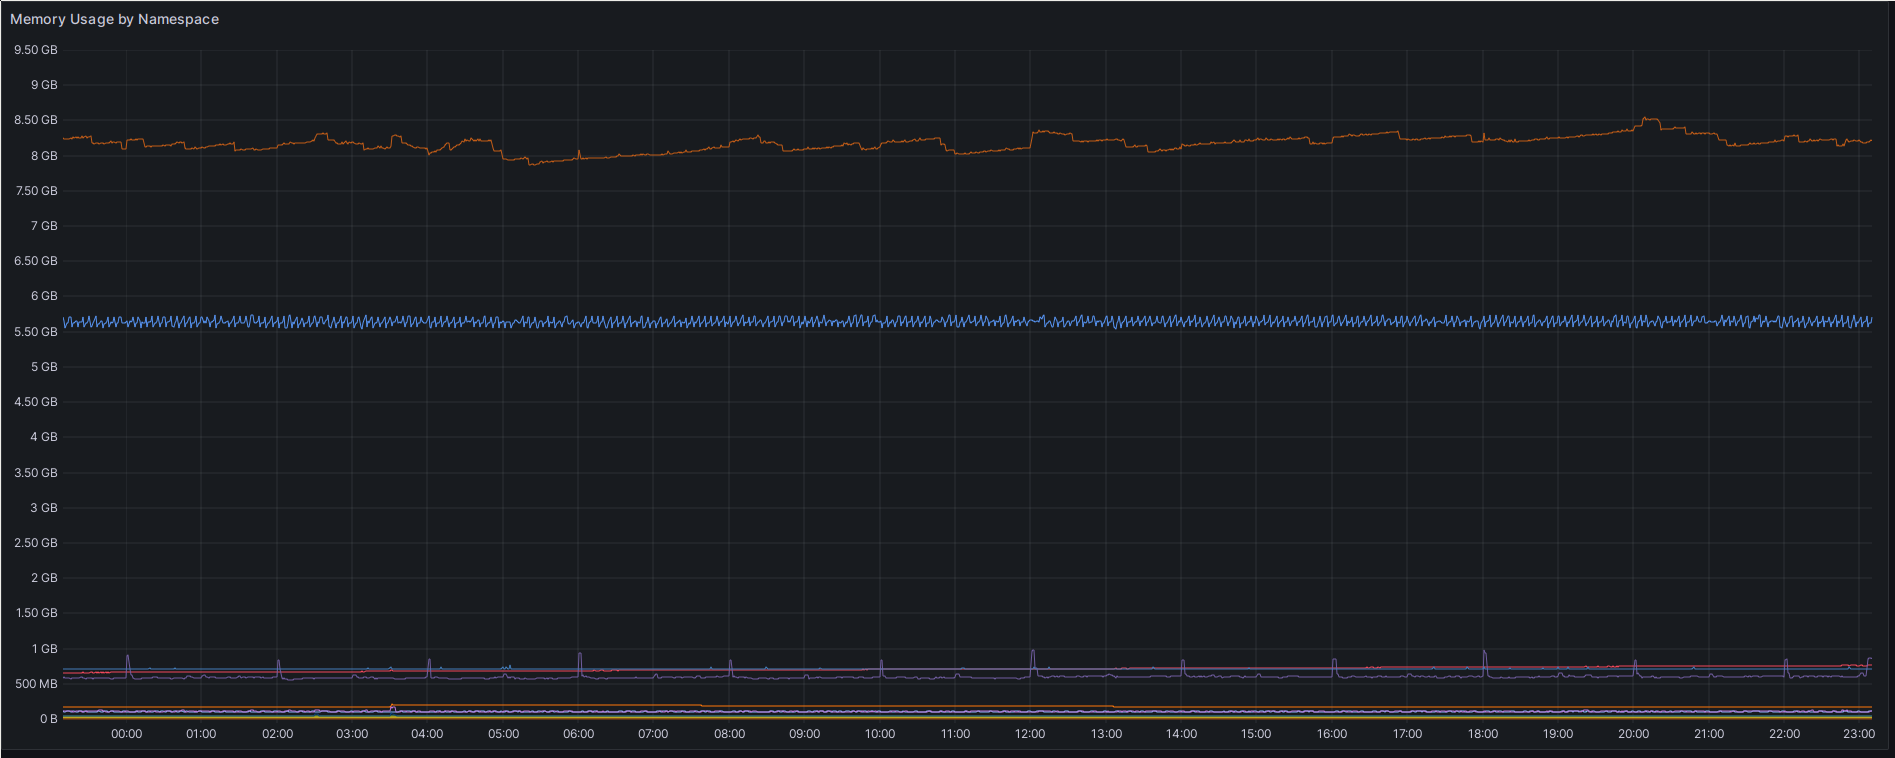 Another Grafana screenshot, this time of a panel for the Memory consumption, by namespace. It shows a 24h interval. There are two distinct curves at 5.5 GB and 8.3 GB. The 5.5 GB curve only slightly throughout the day, while the 8.3 GB curve shows a max of 8.5 GB and a minimum of 7.9 GB.